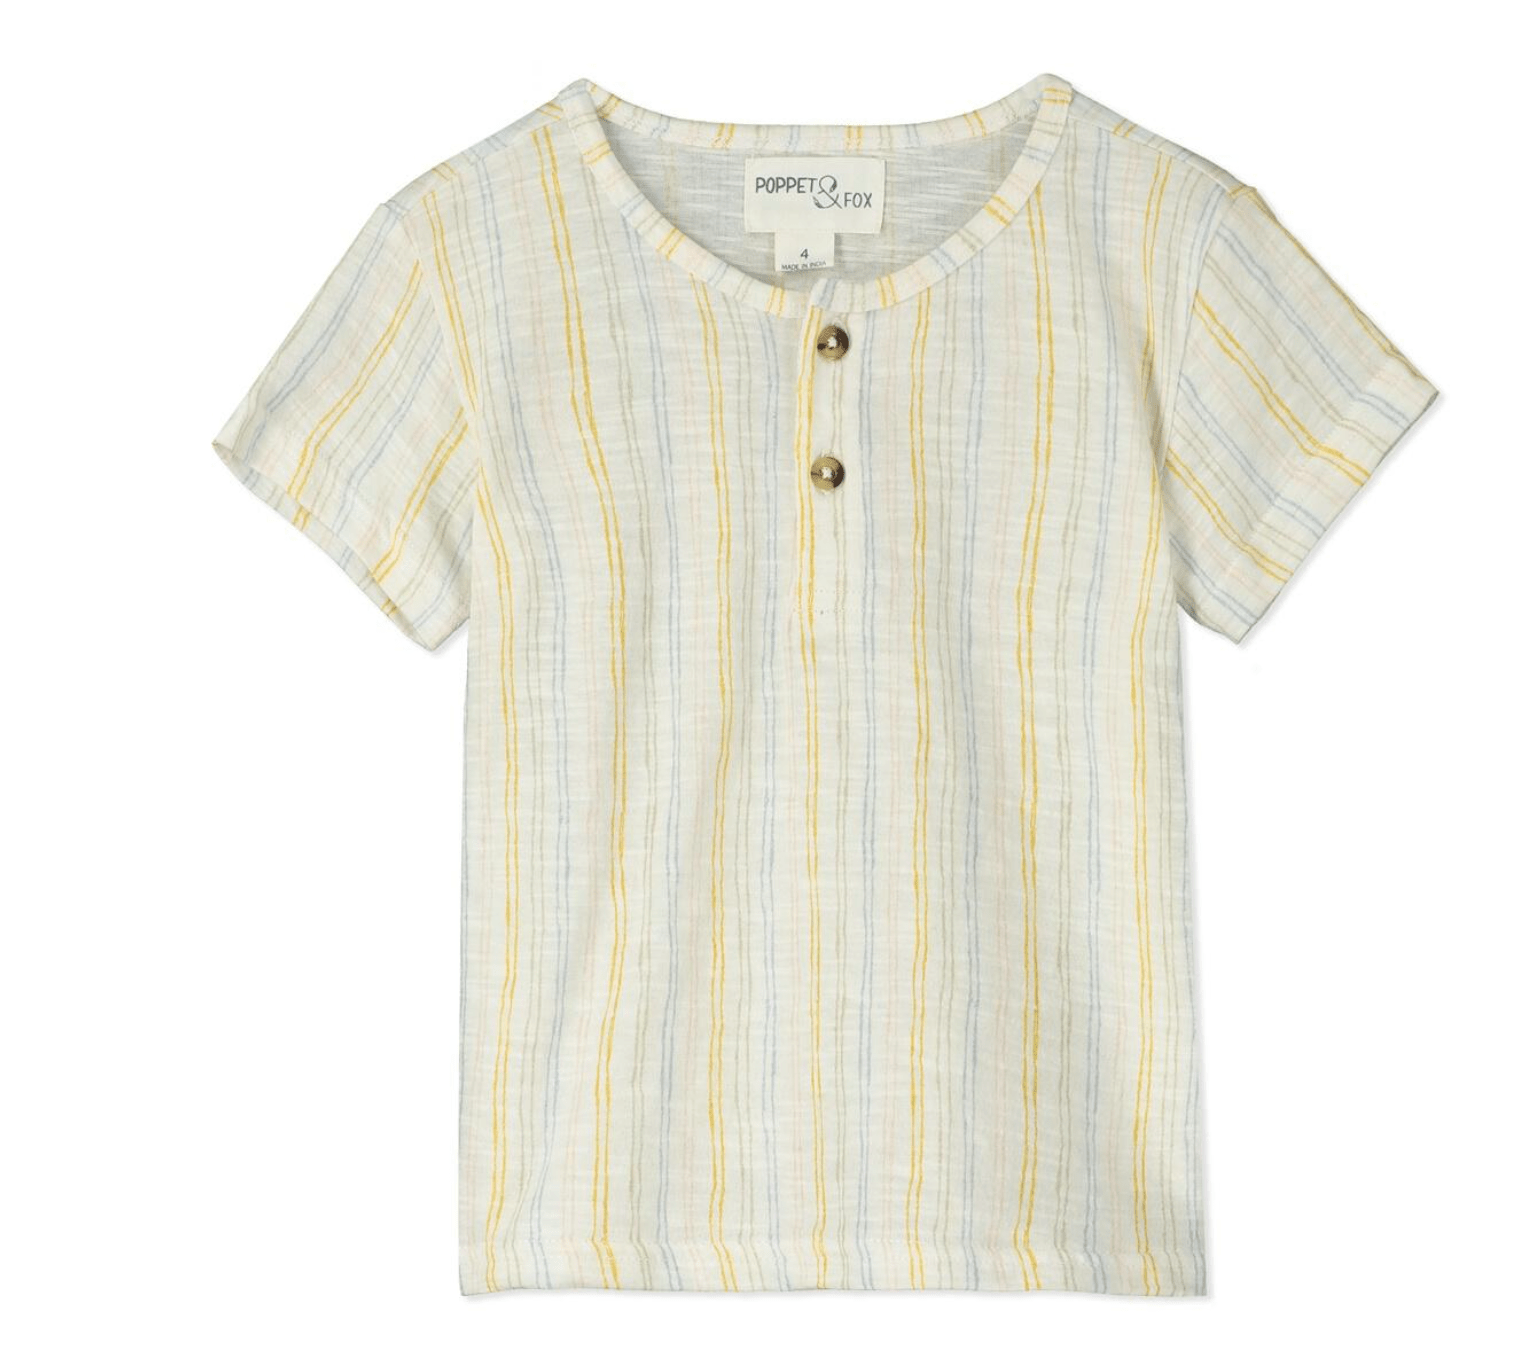 Poppet and Fox Striped Jersey Shirt